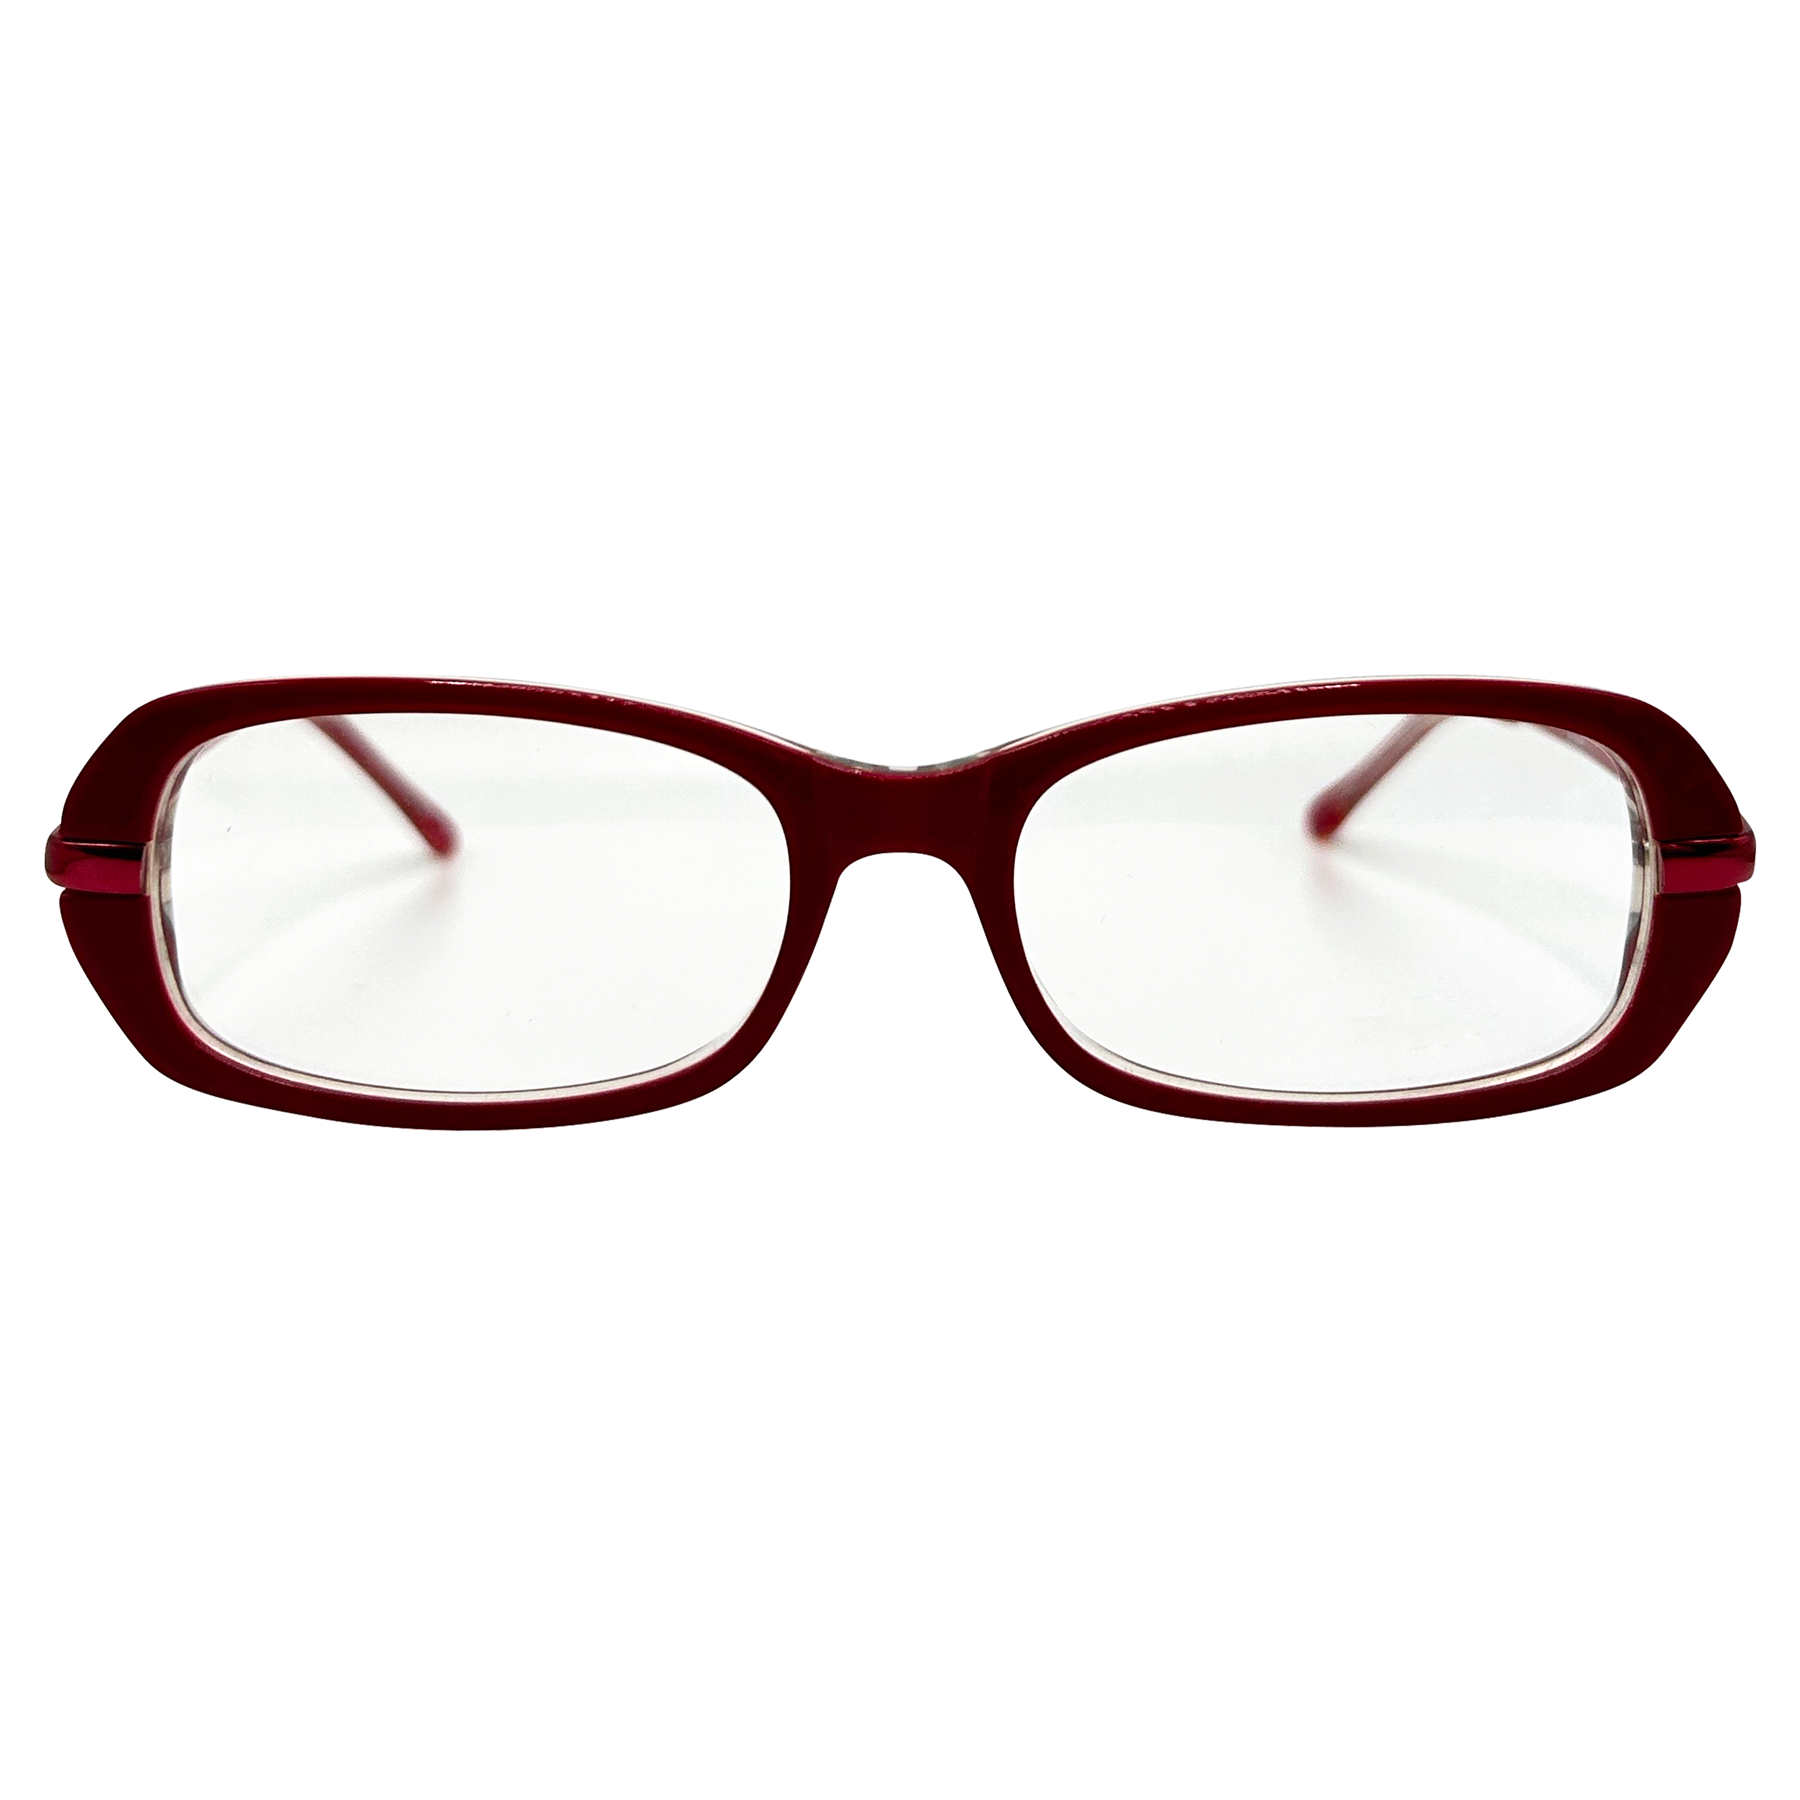 CURLY Small Clear Rectangular 90s Optical Frame